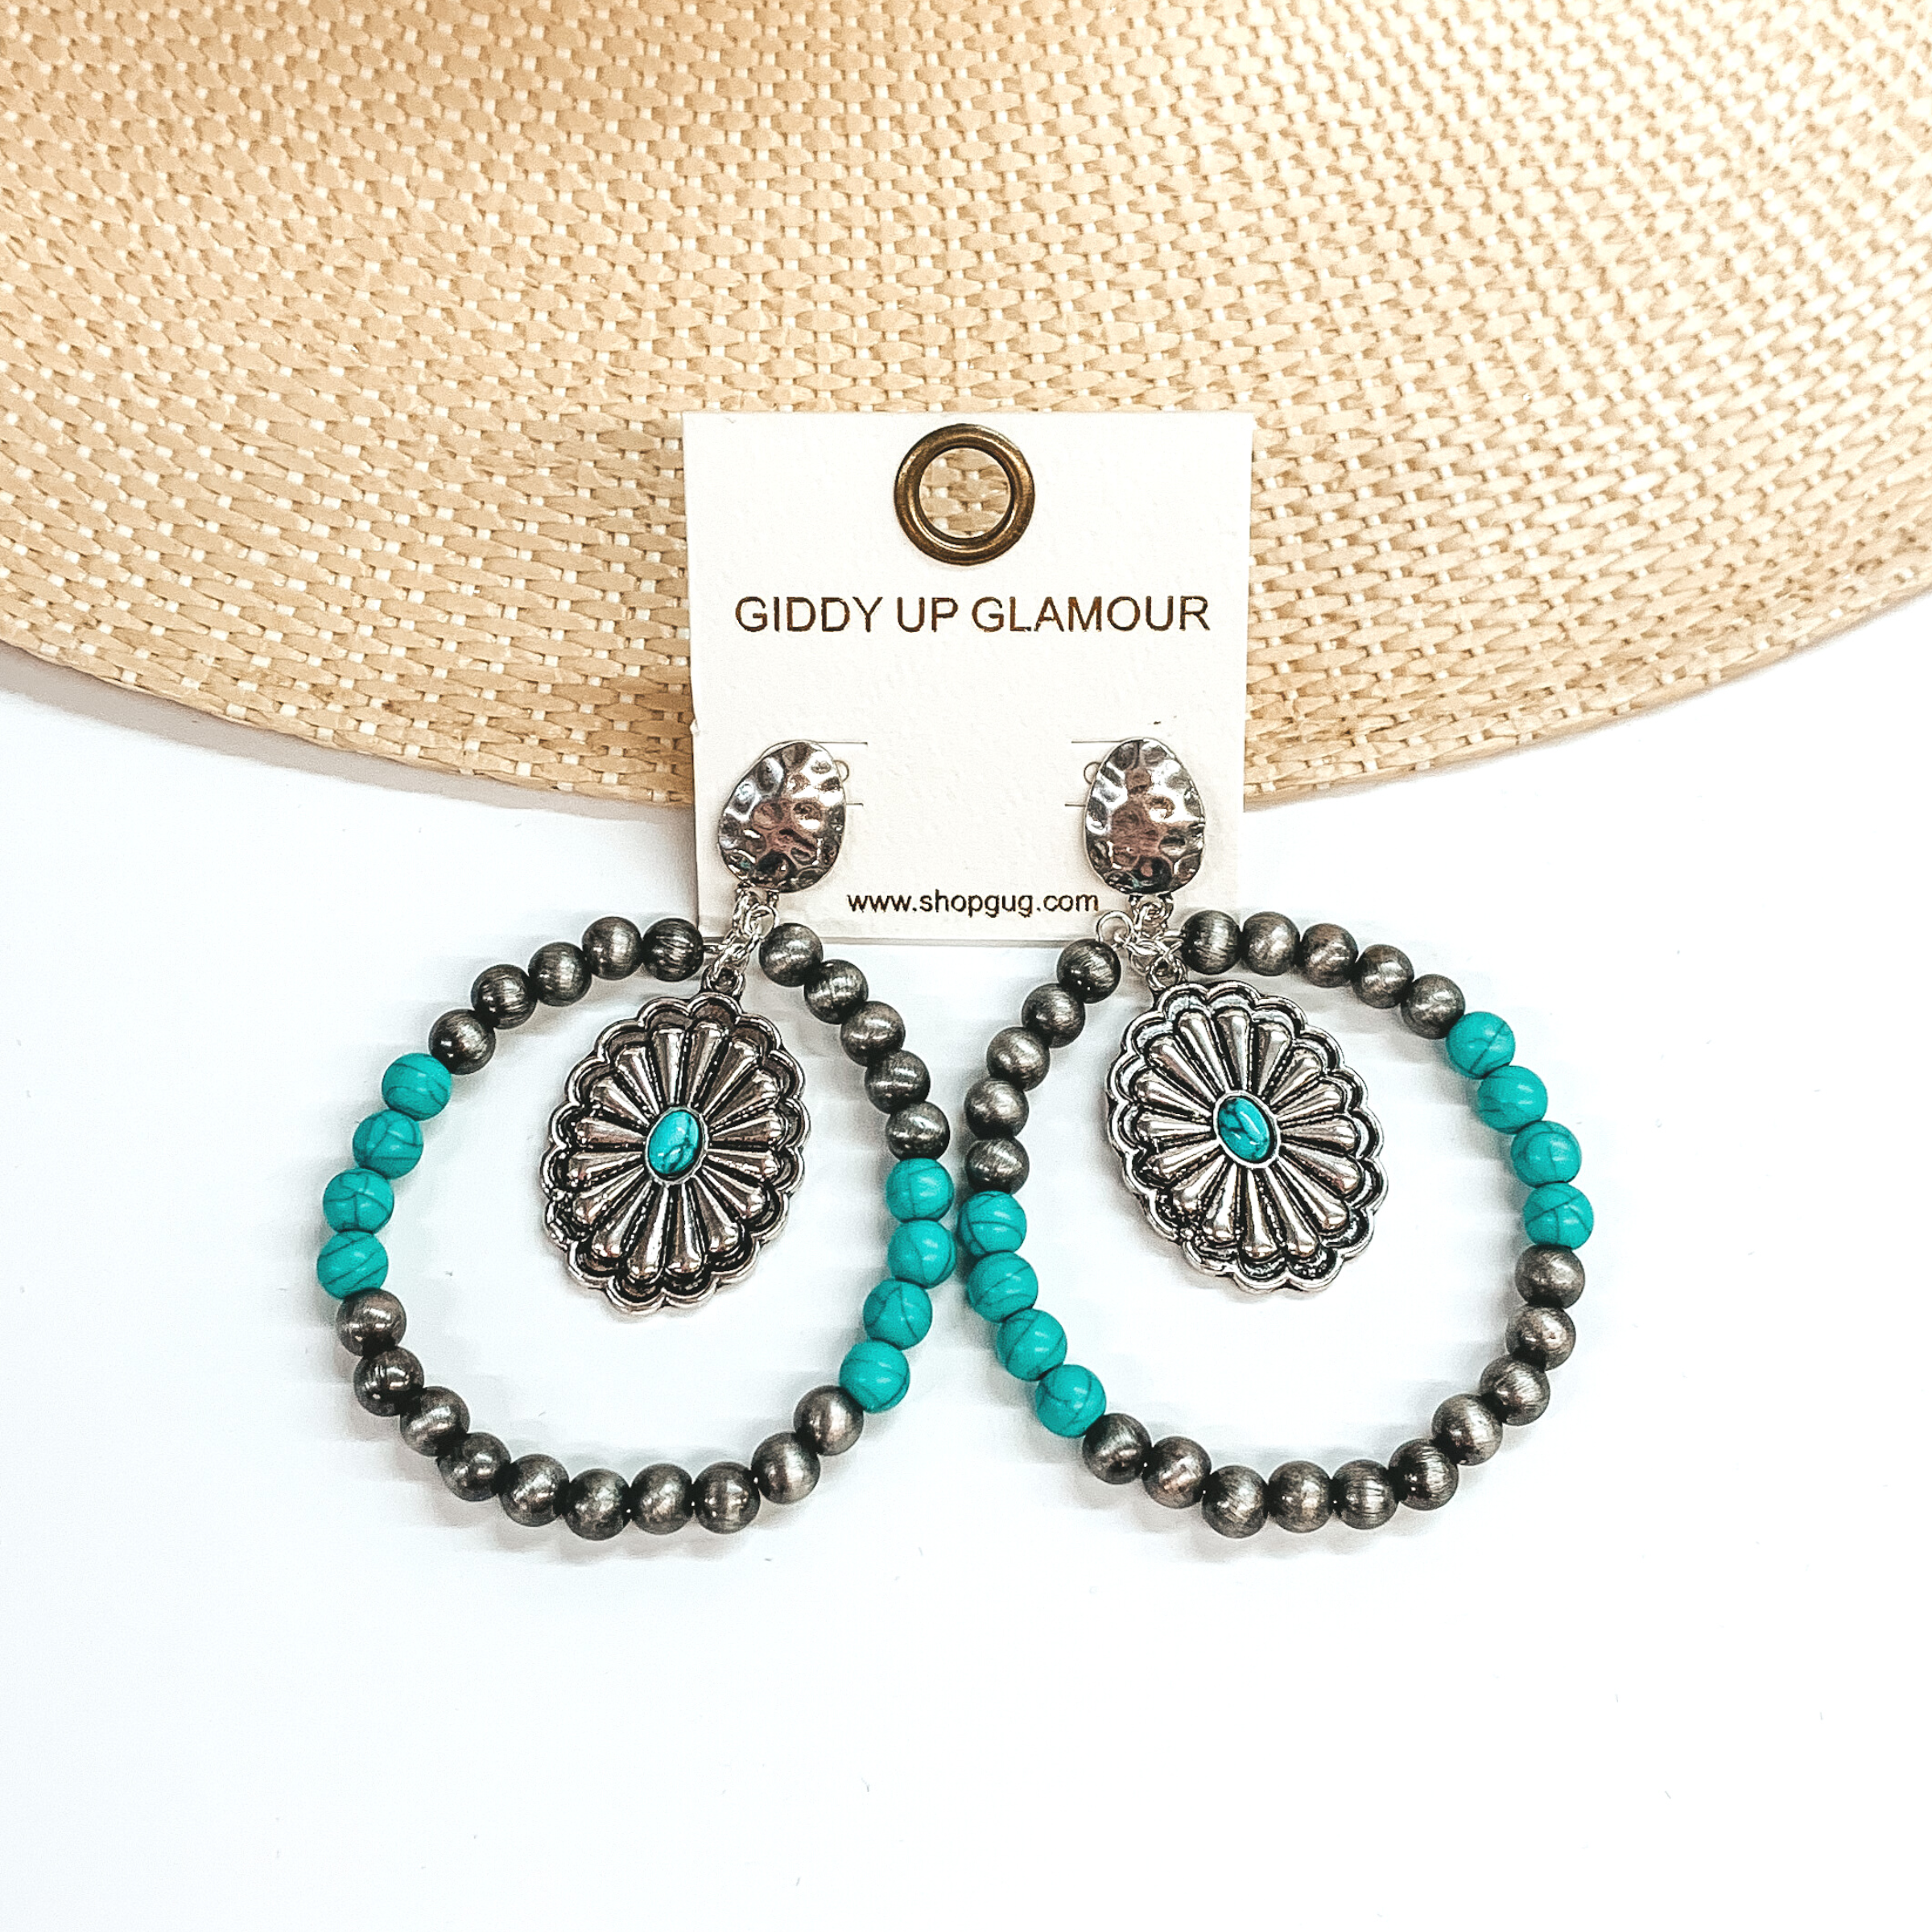 These are silver and turquoise beaded circle drop earrings with a  silver hammered post back. The circle drop has Navajo pearls in silver  and four turquoise beads in each side. There is a silver concho pendant  in the middle with a small oval turquoise stone.  These earrings are taken leaning on a light brown  straw hat brim and a white background.